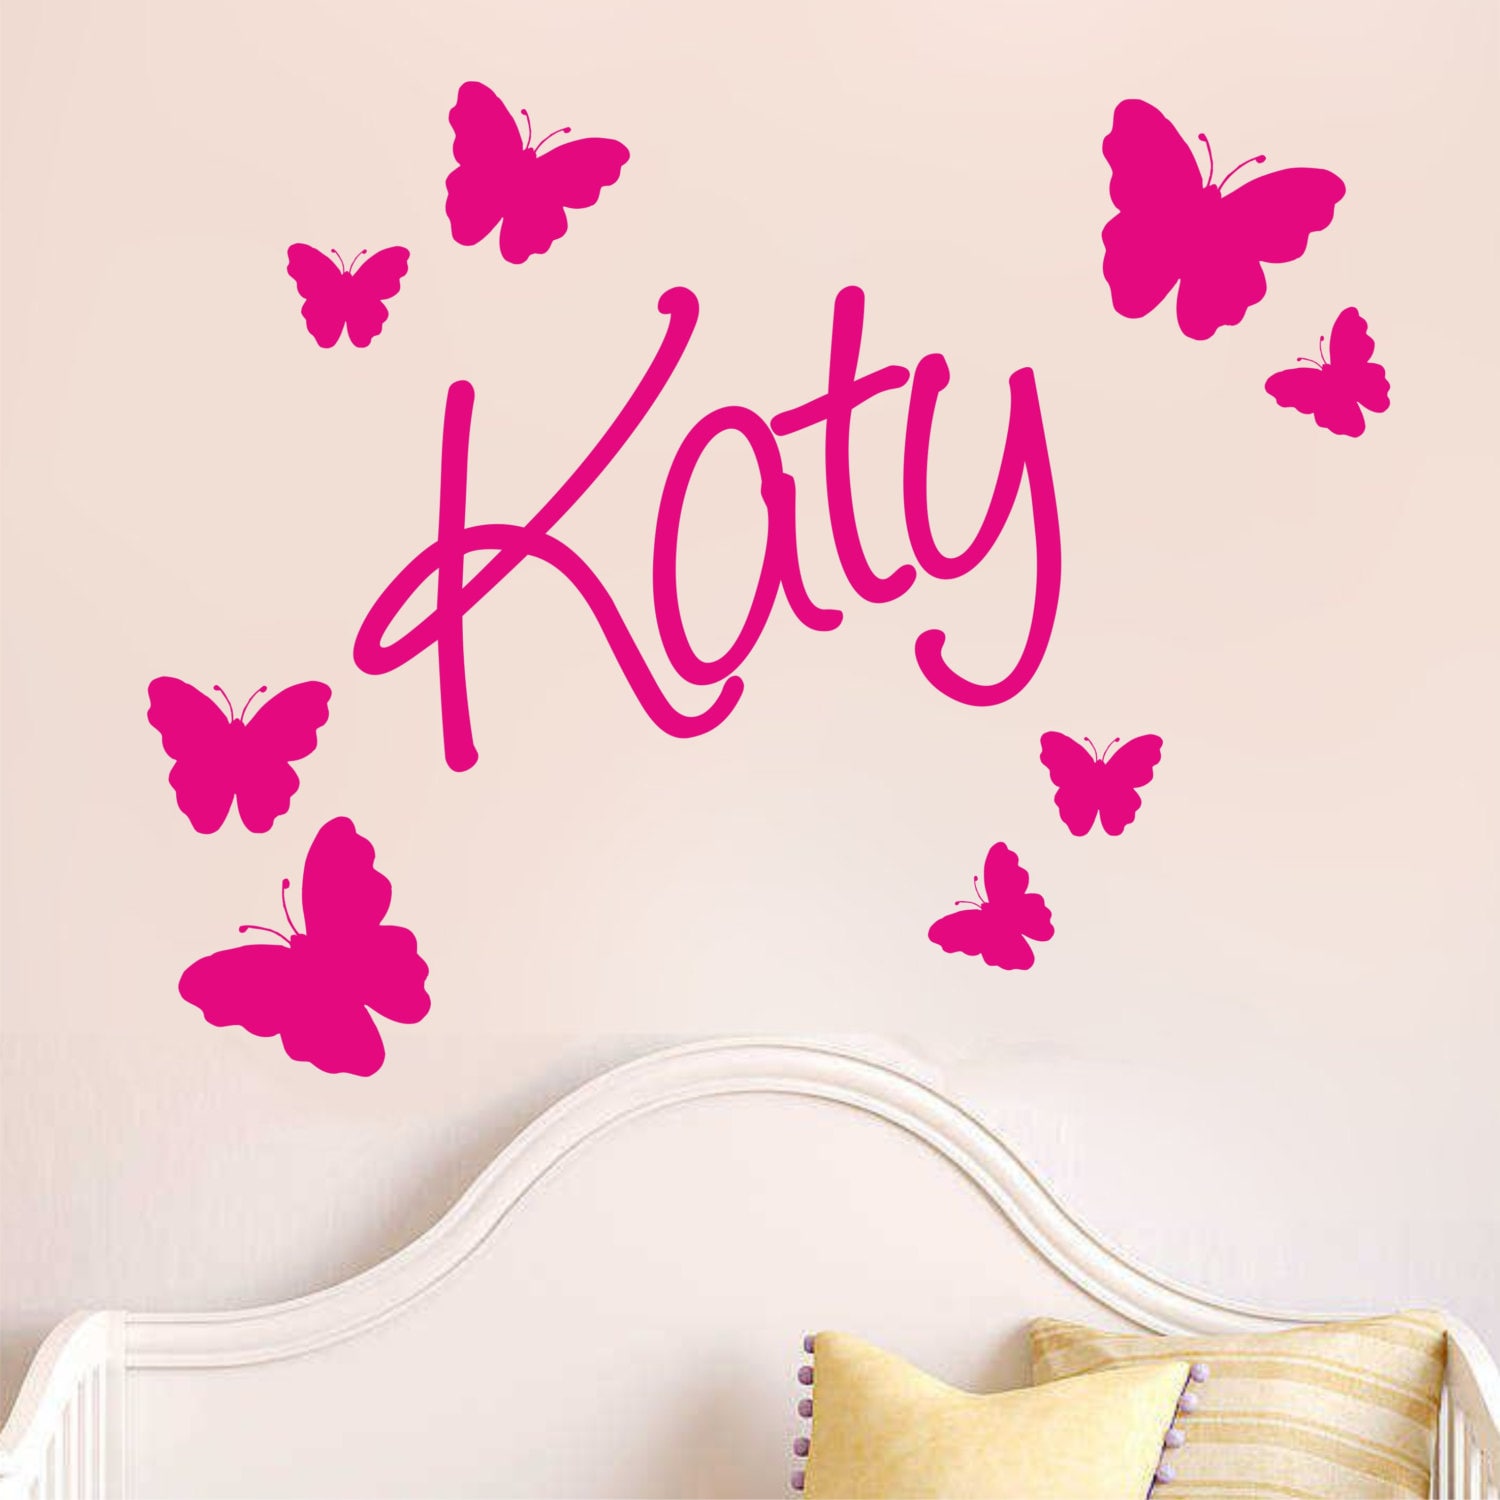 NA59 Personalised Script Bespoke Name With Butterflies Wall Sticker Decal Vinyl